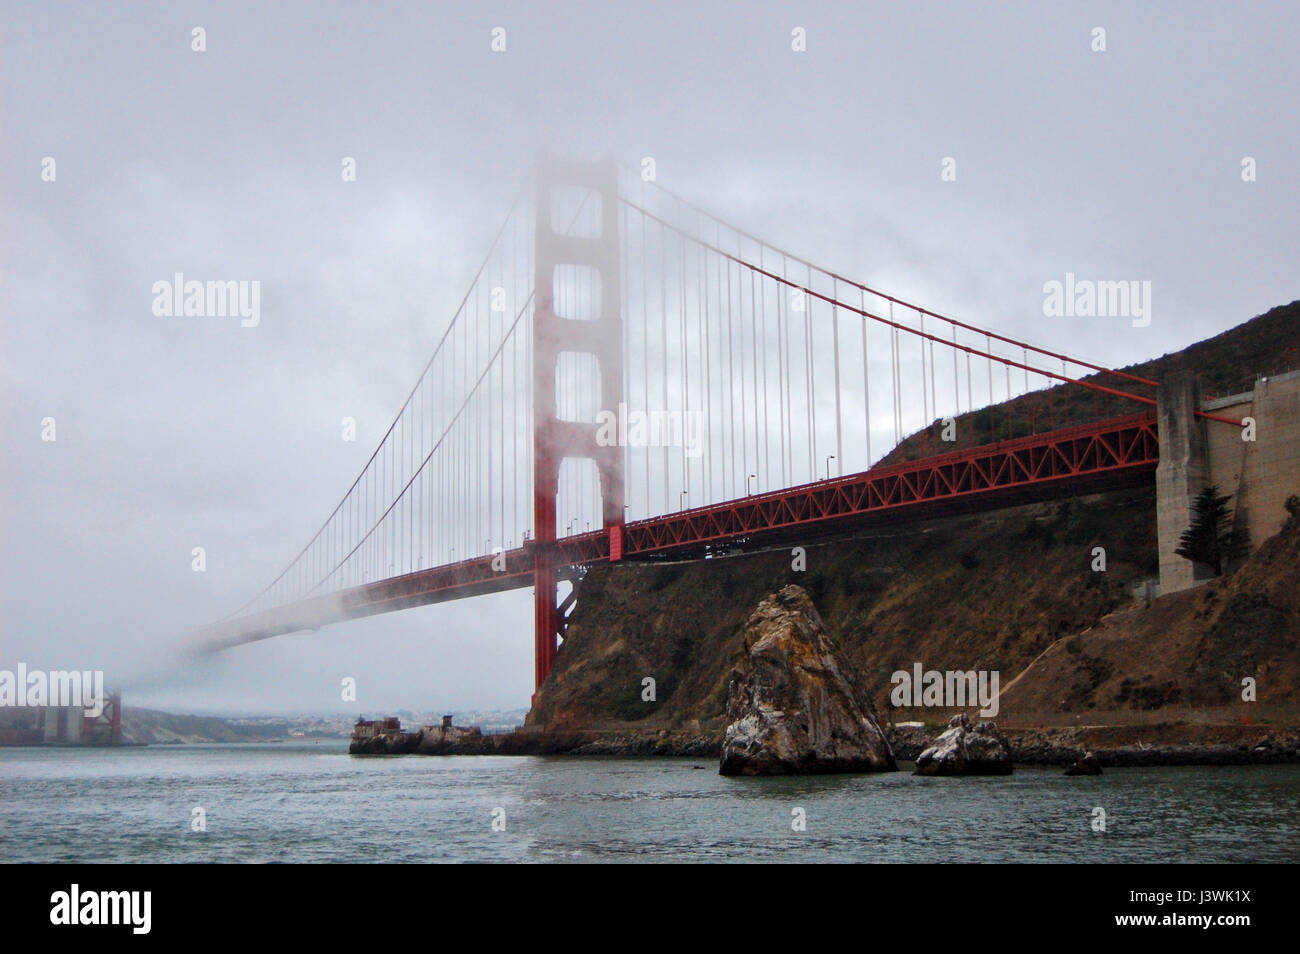 Image of the famous Golden Gate bridge in a very foggy day in San Francisco, California, USA. August 2013. Stock Photo